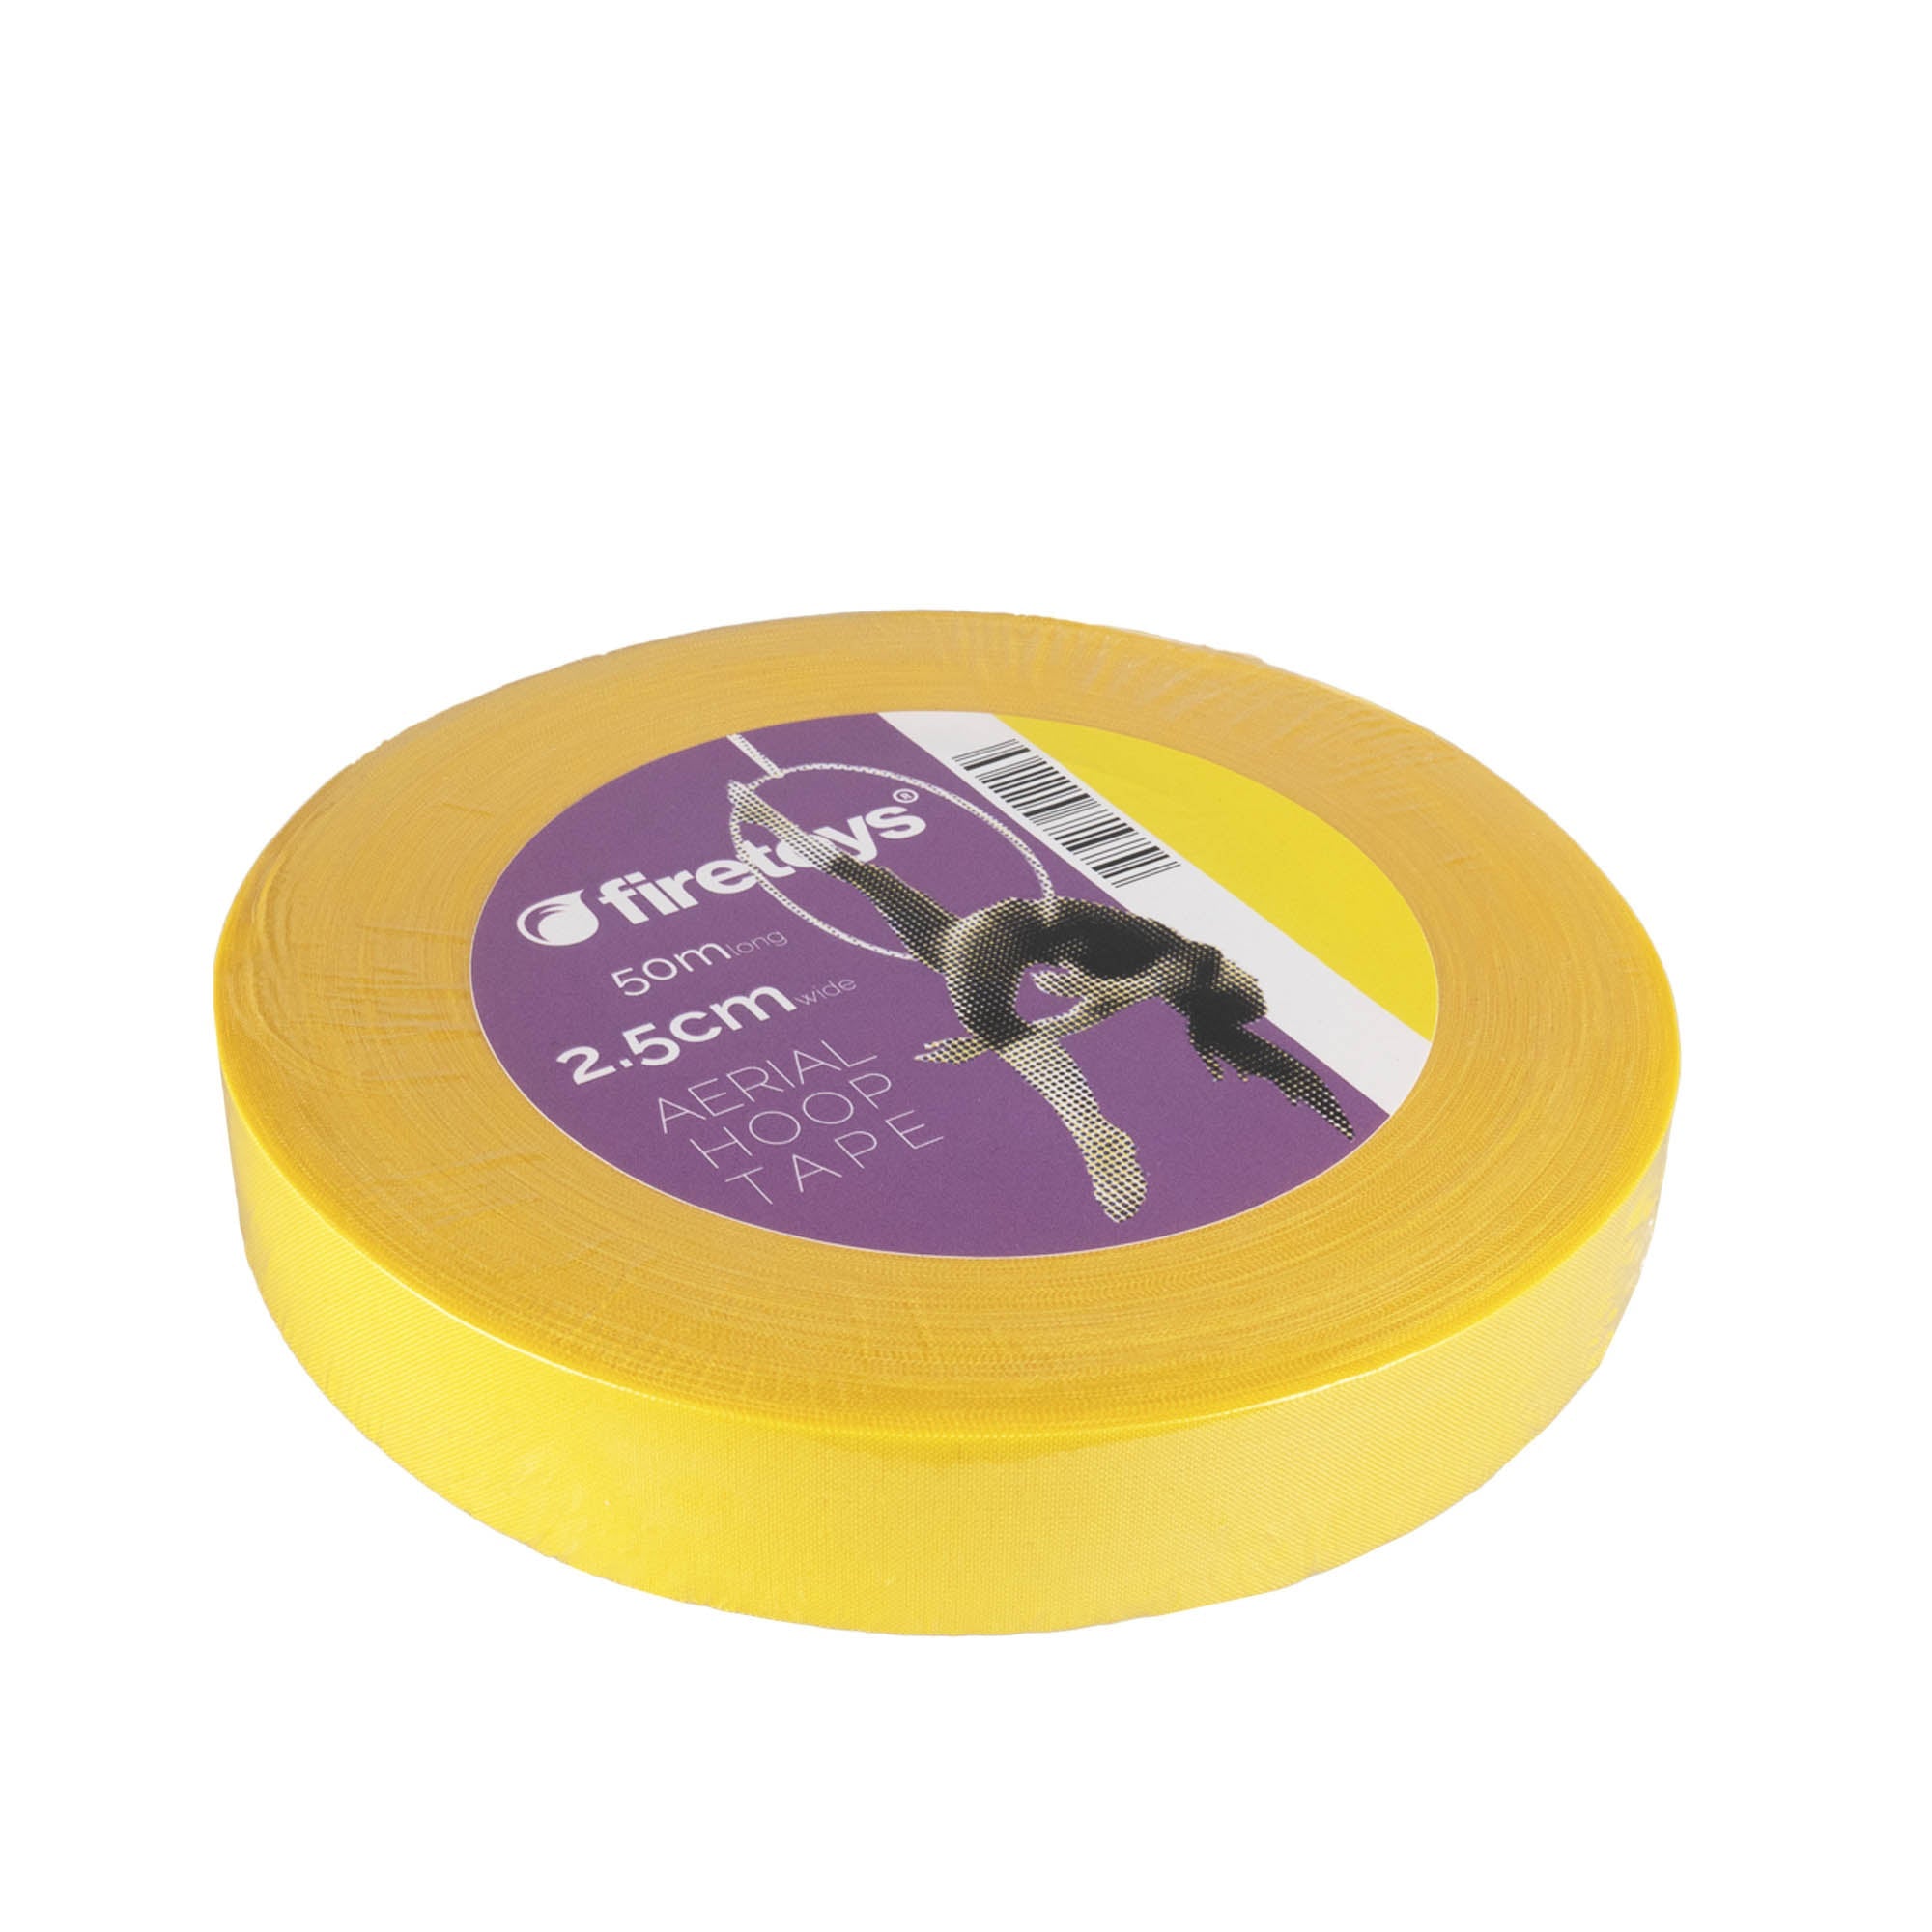 packaged roll of yellow 2.5cm wide tape